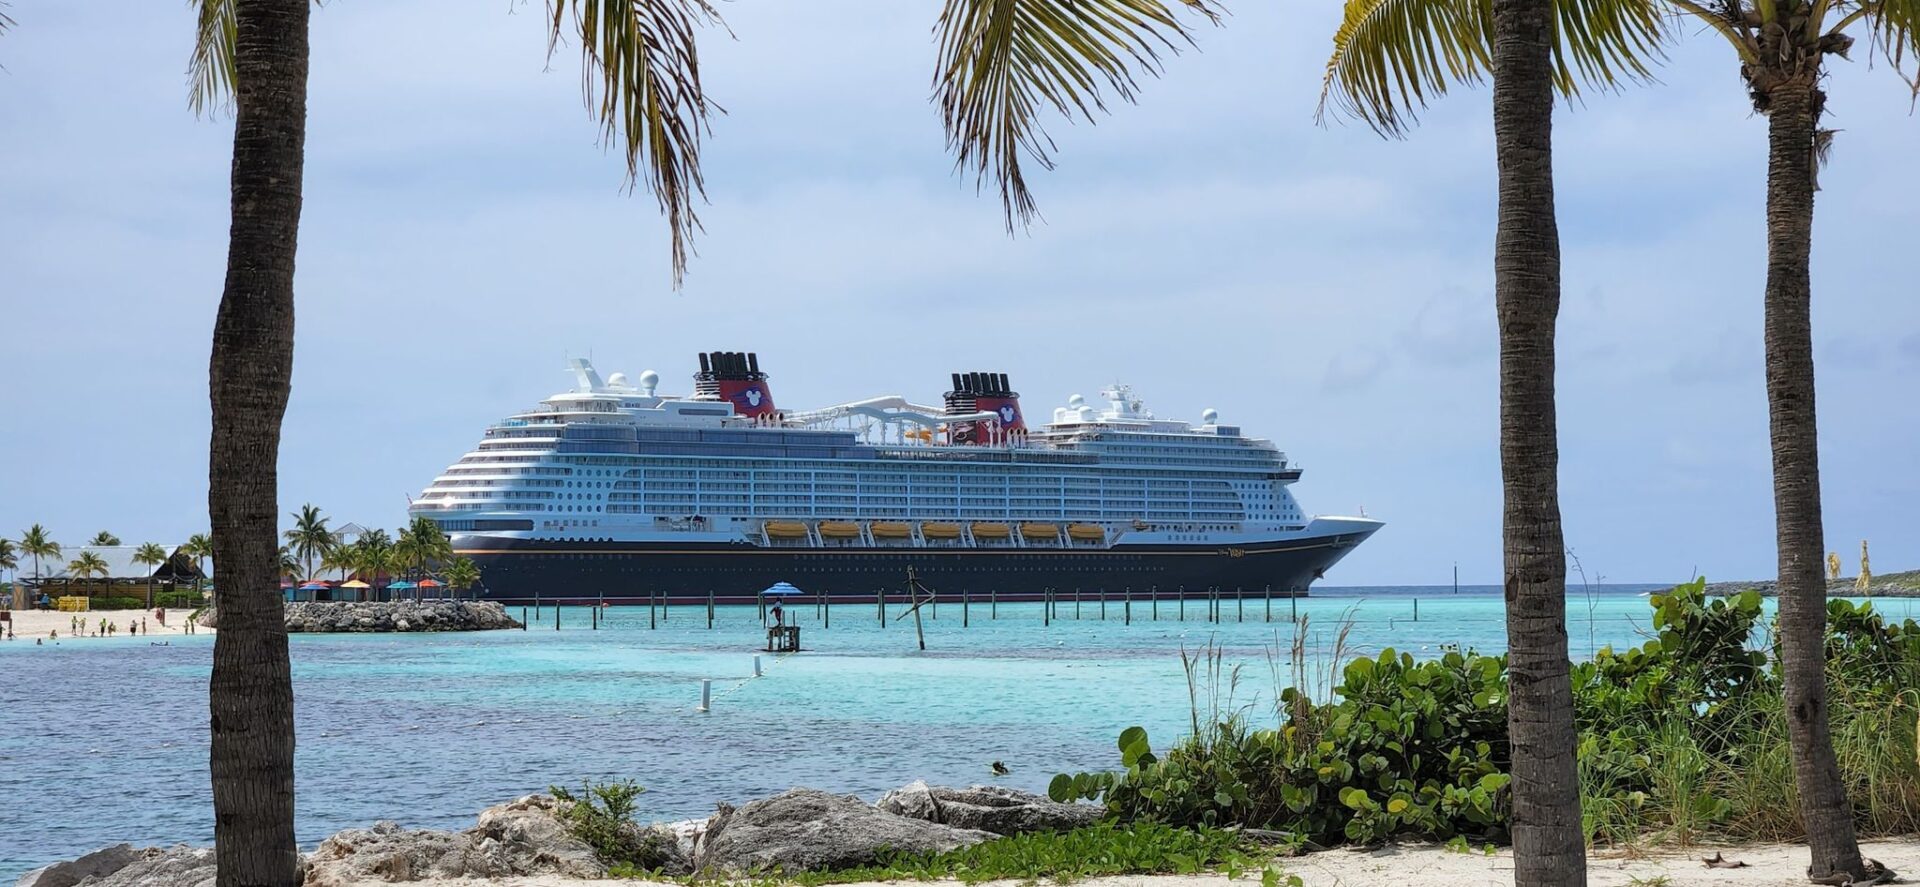 Disney Cruise Line Honored by Forbes for Exceptional Service and Dining Experiences